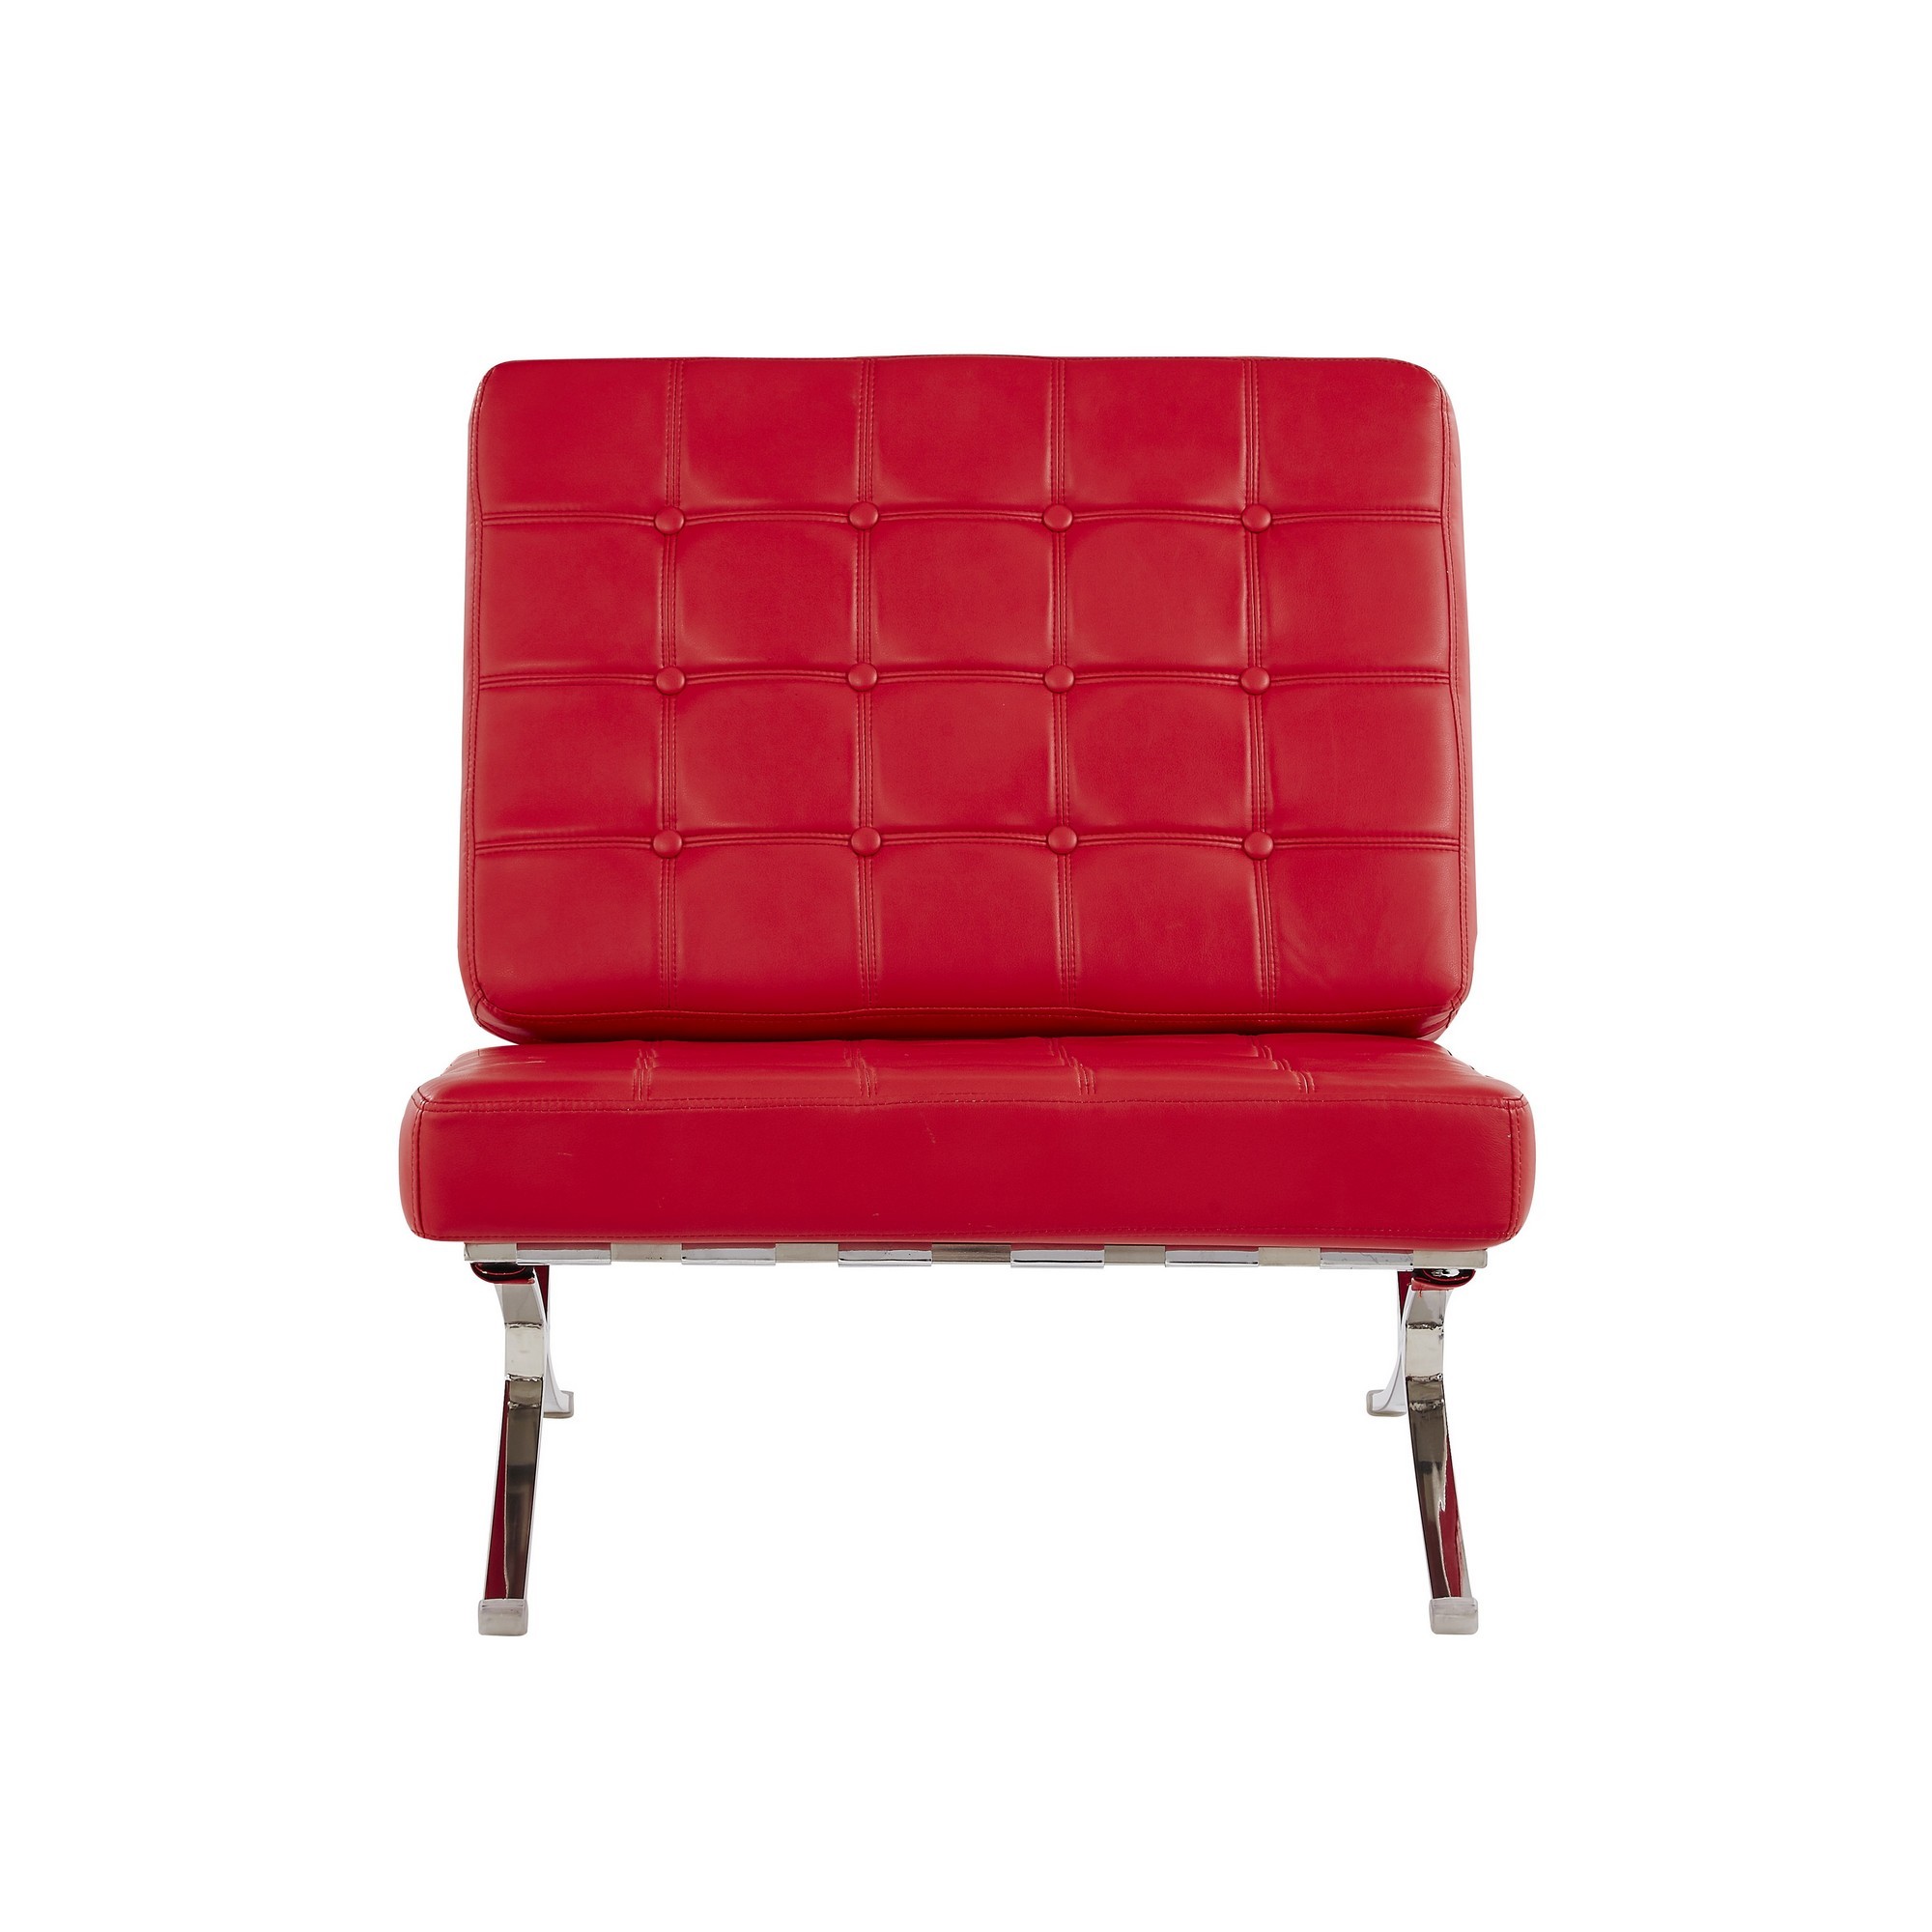 Red Chair with Wide Spacious Seat and Button Tufted Details